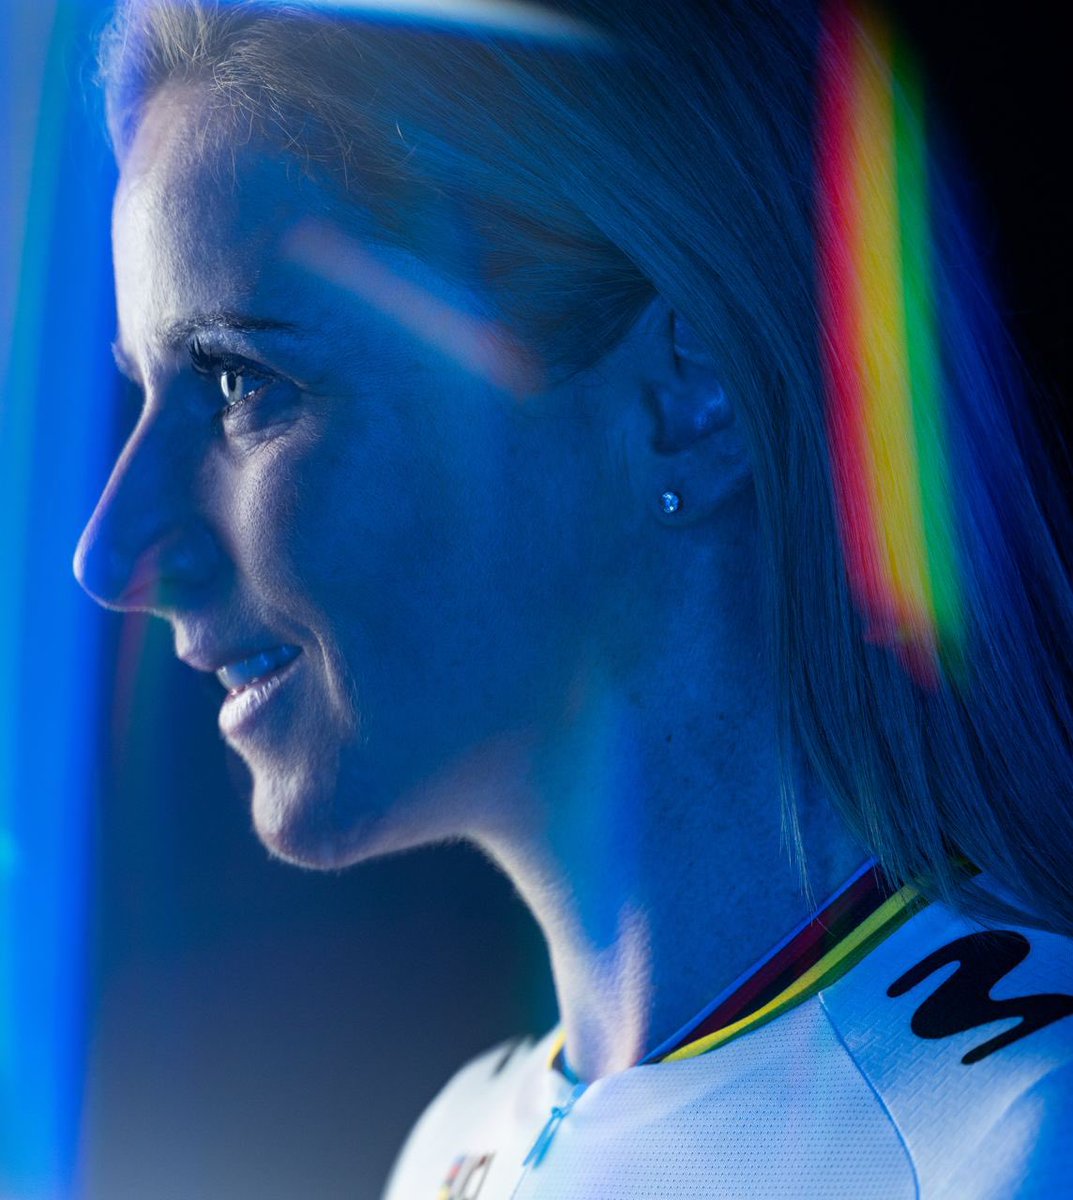 A year in 🌈 is coming… 🔜👑2️⃣3️⃣

#MiekItHappen 

📸 @cxcling